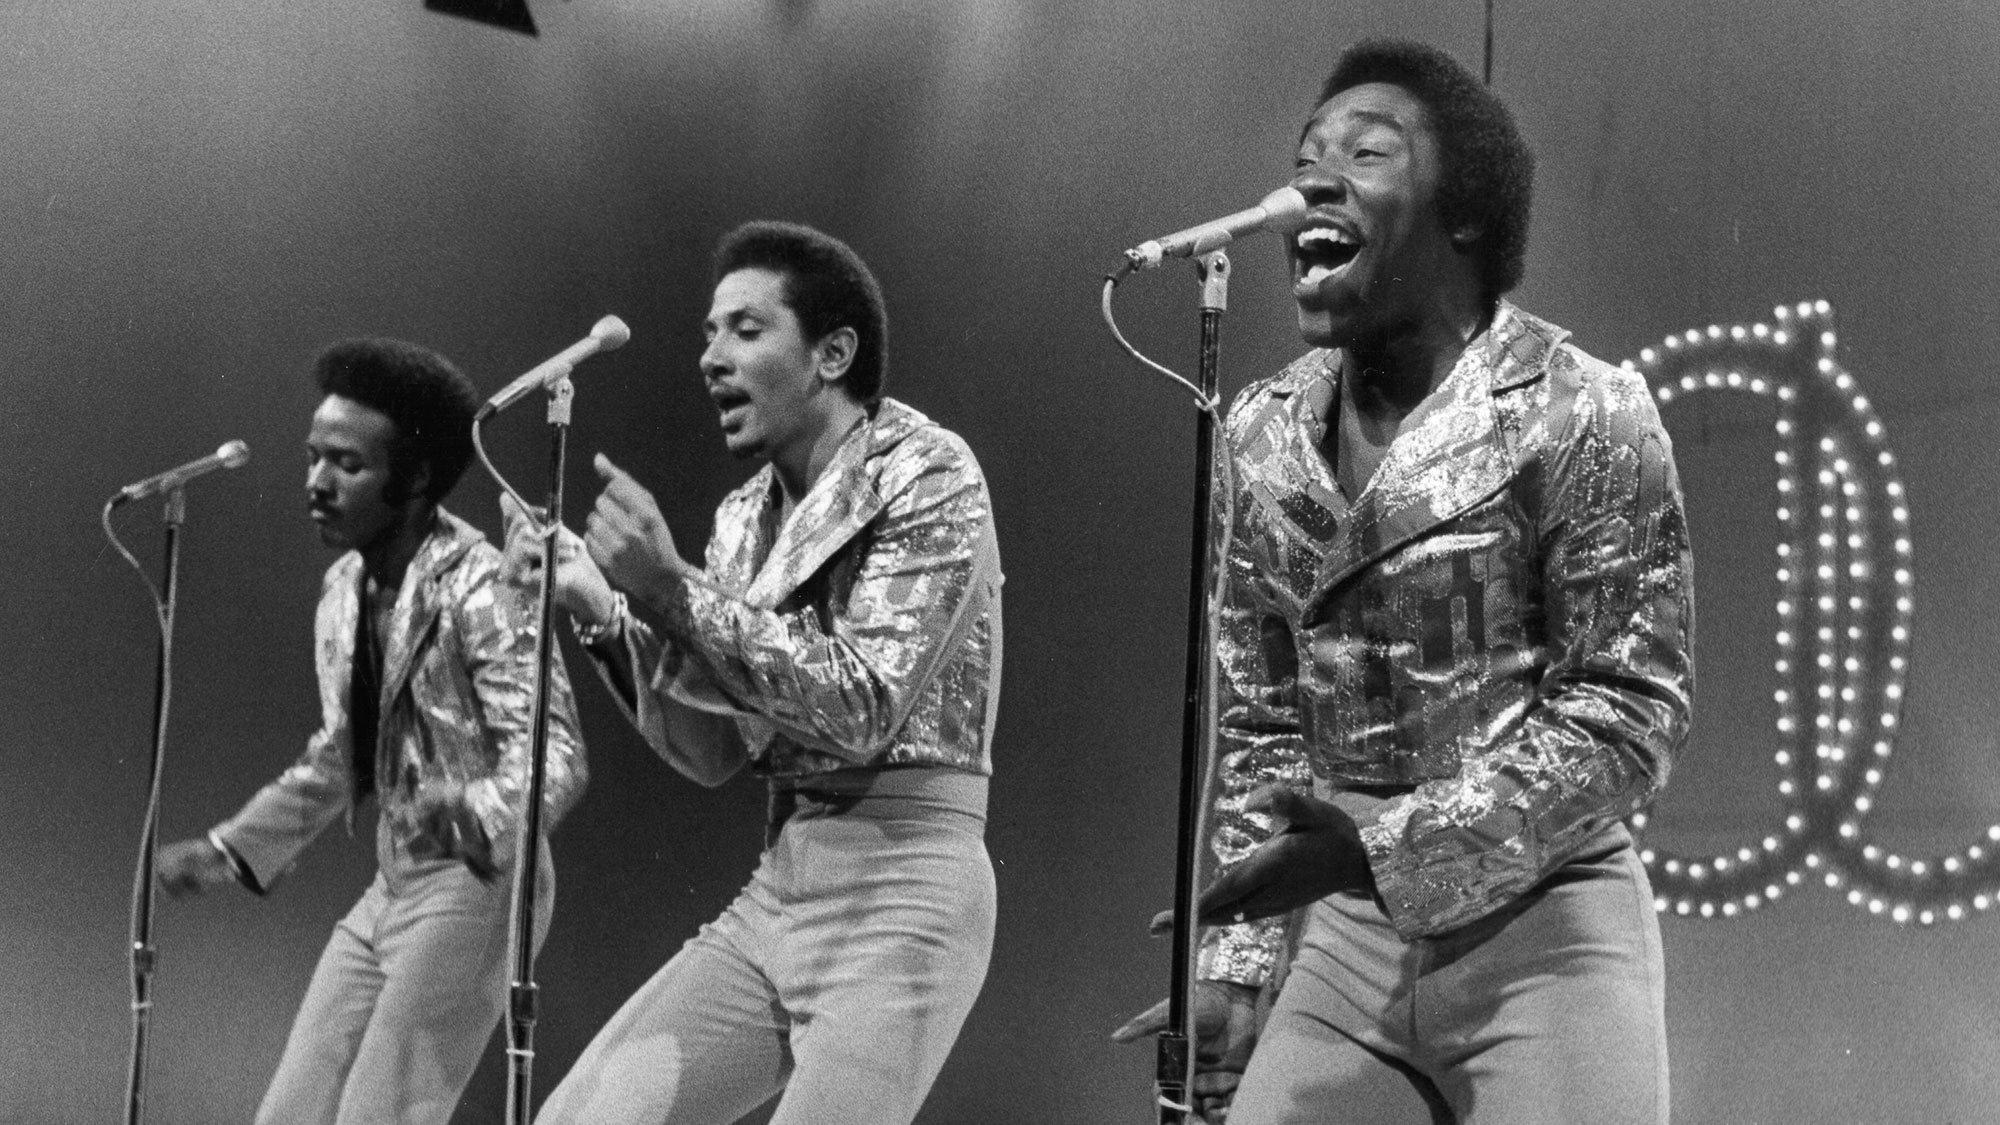 The O'Jays perform during Soul Train.